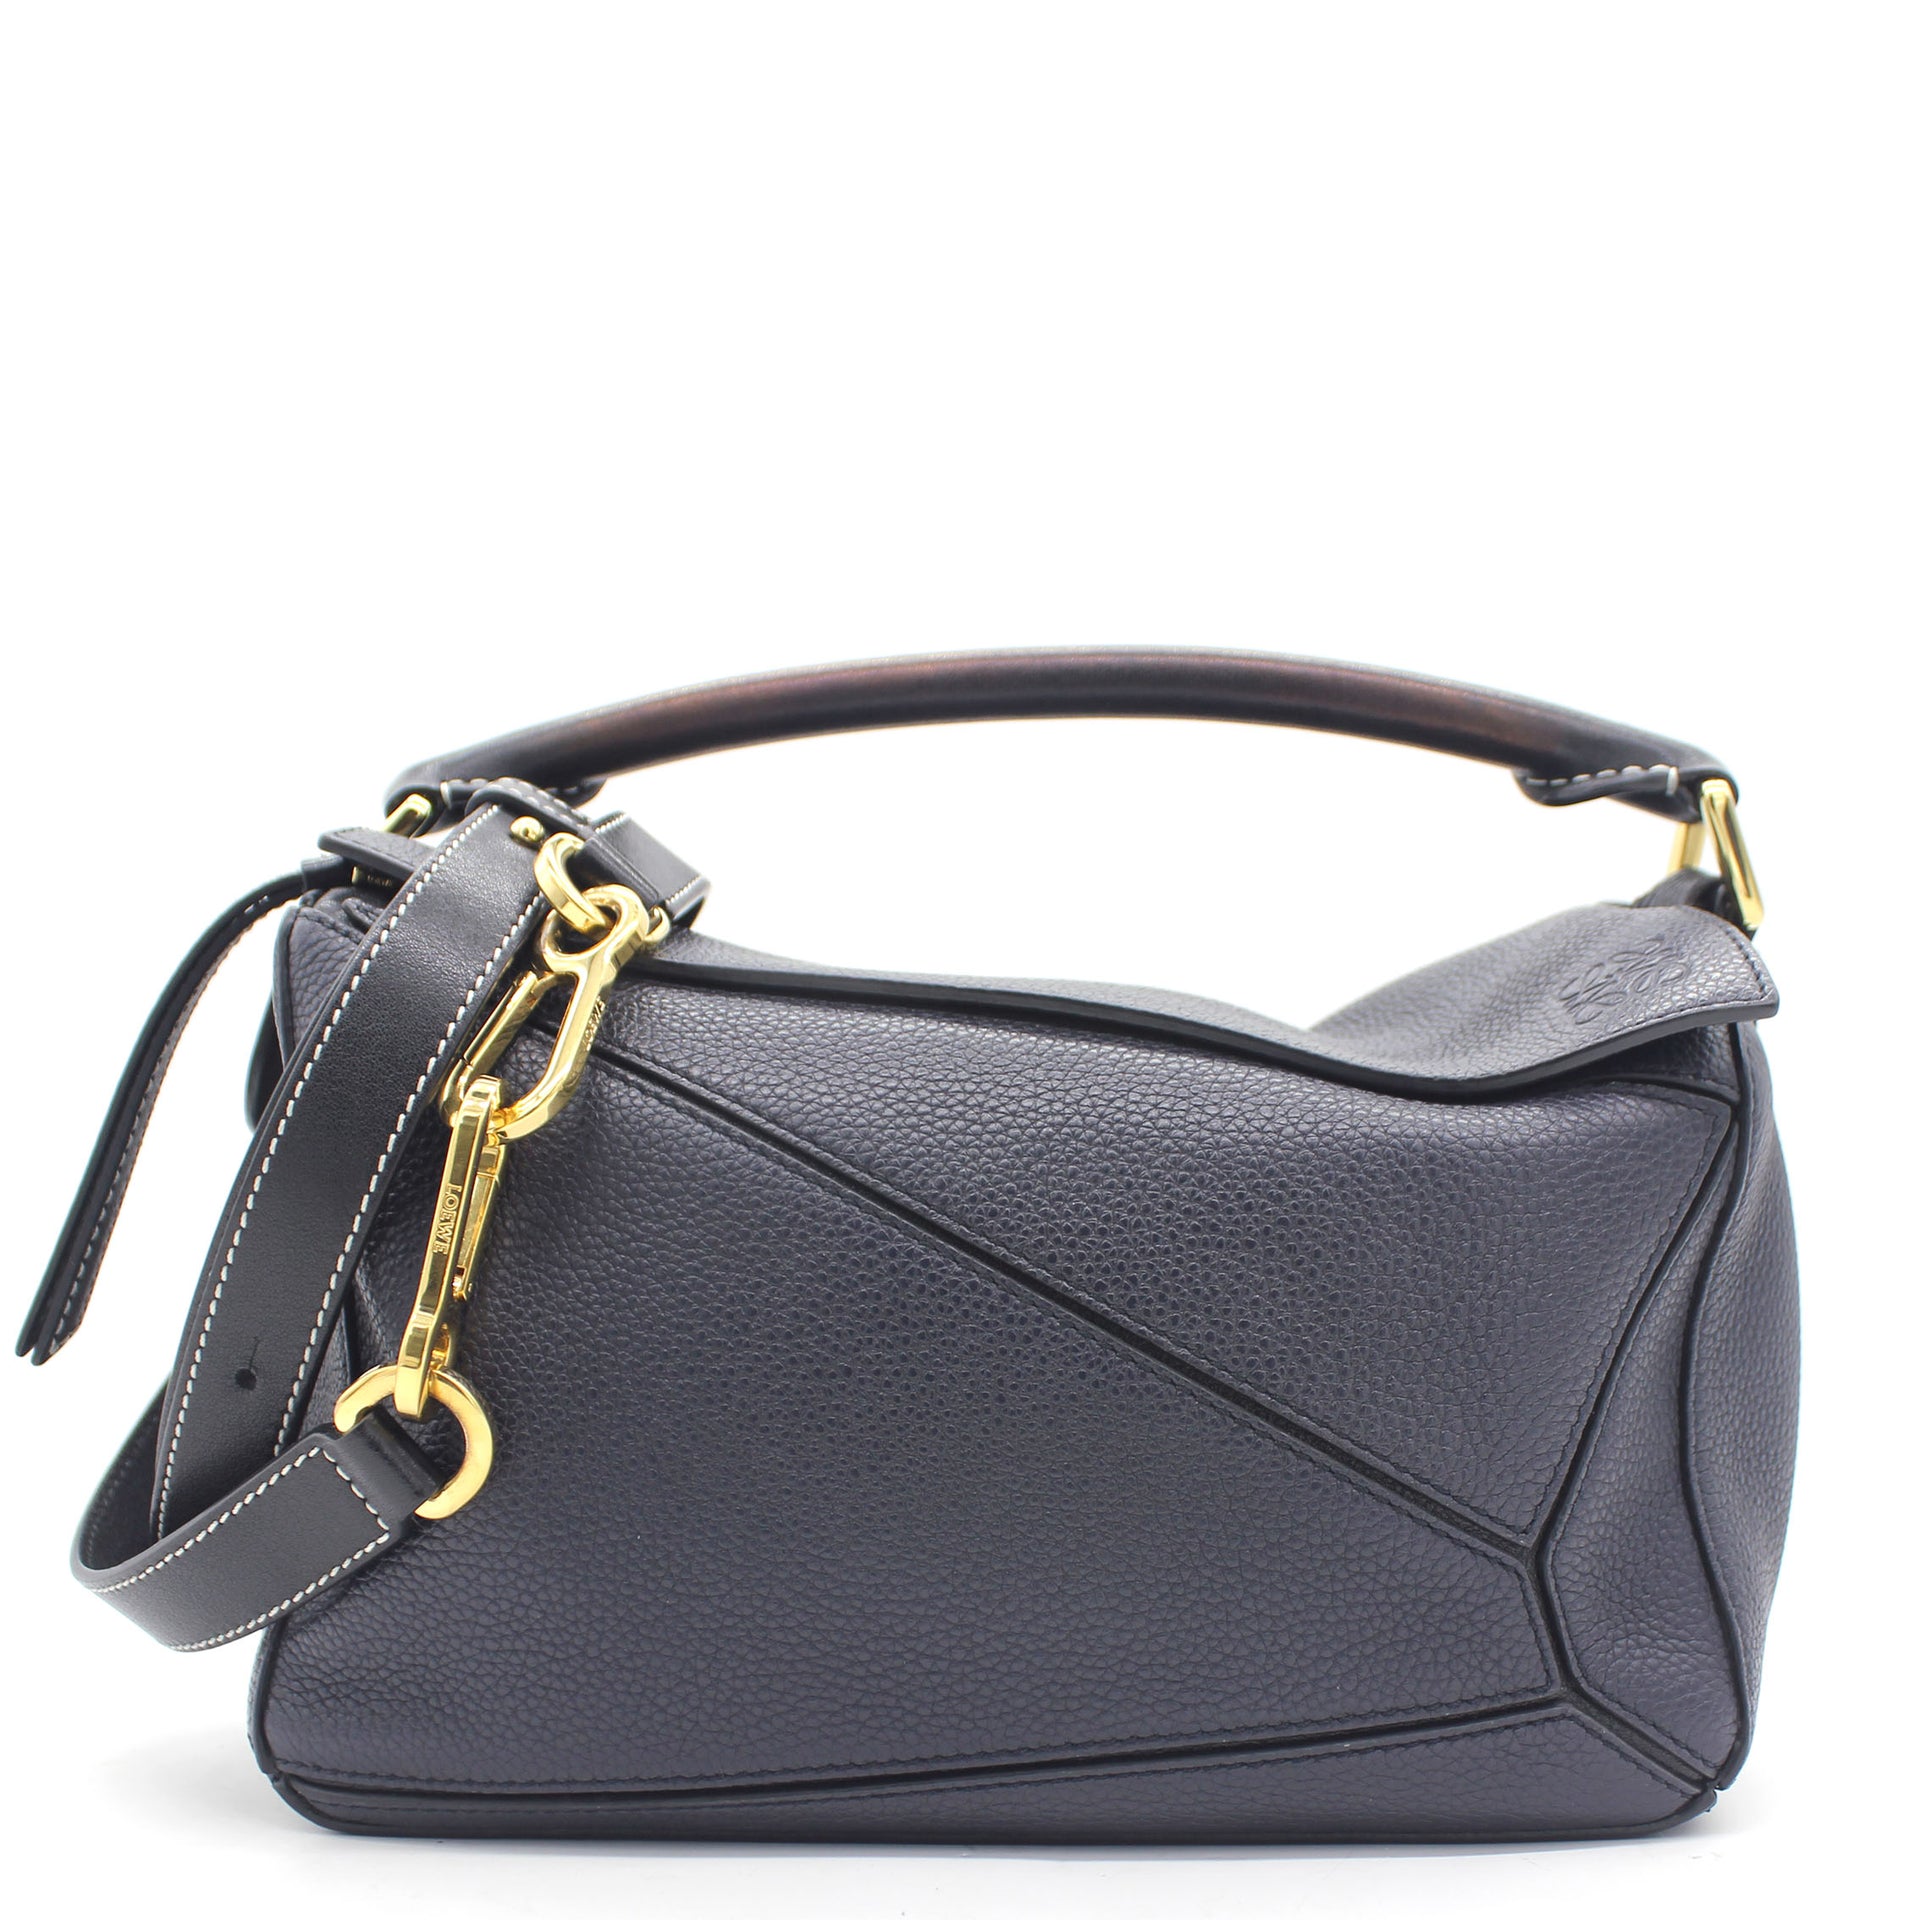 LOEWE Puzzle small leather shoulder bag | NET-A-PORTER